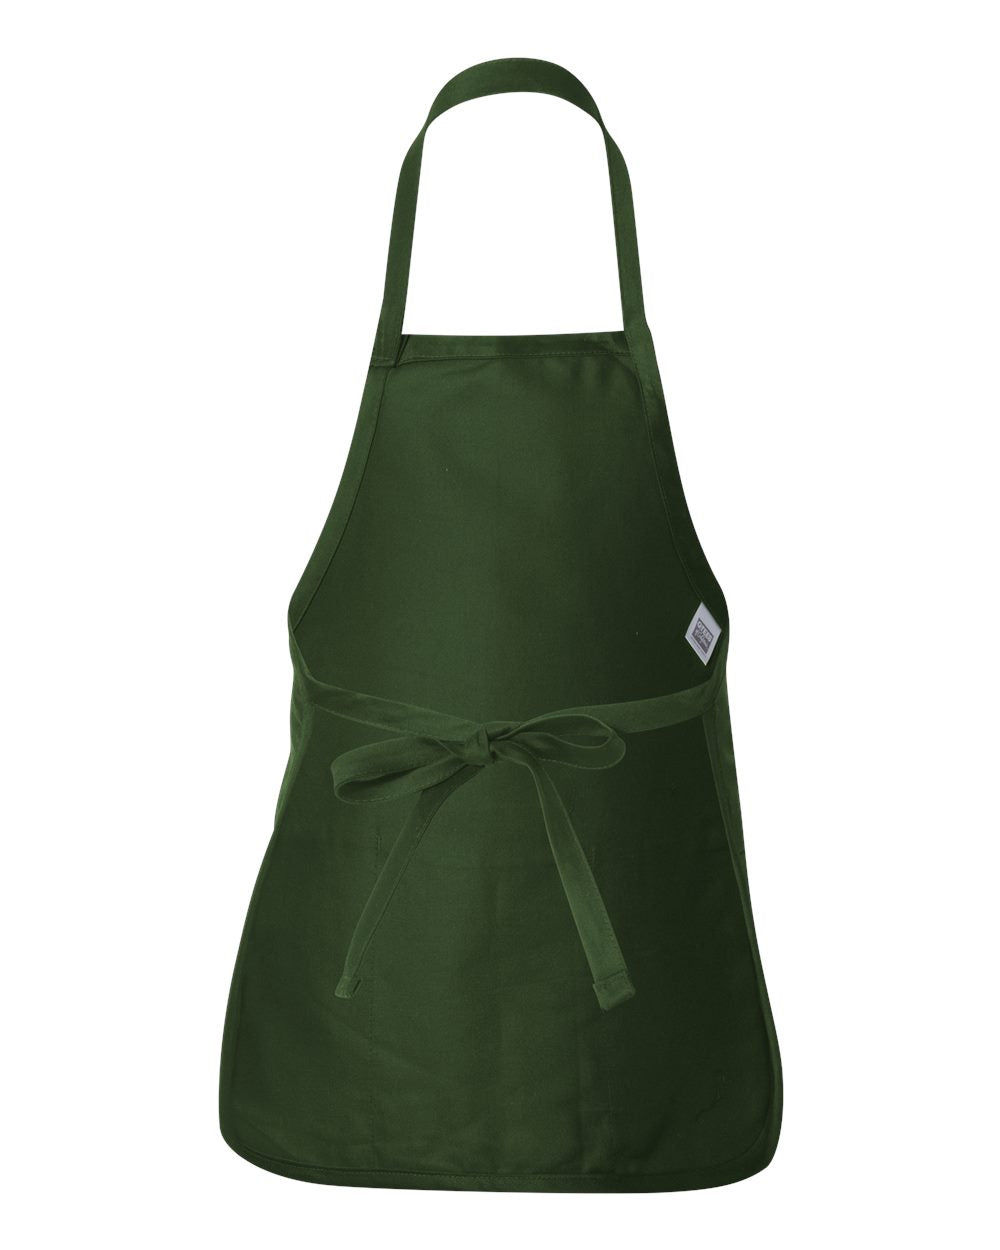 Q-Tees Full-Length Apron with Pouch Pocket Q4250 #color_Forest